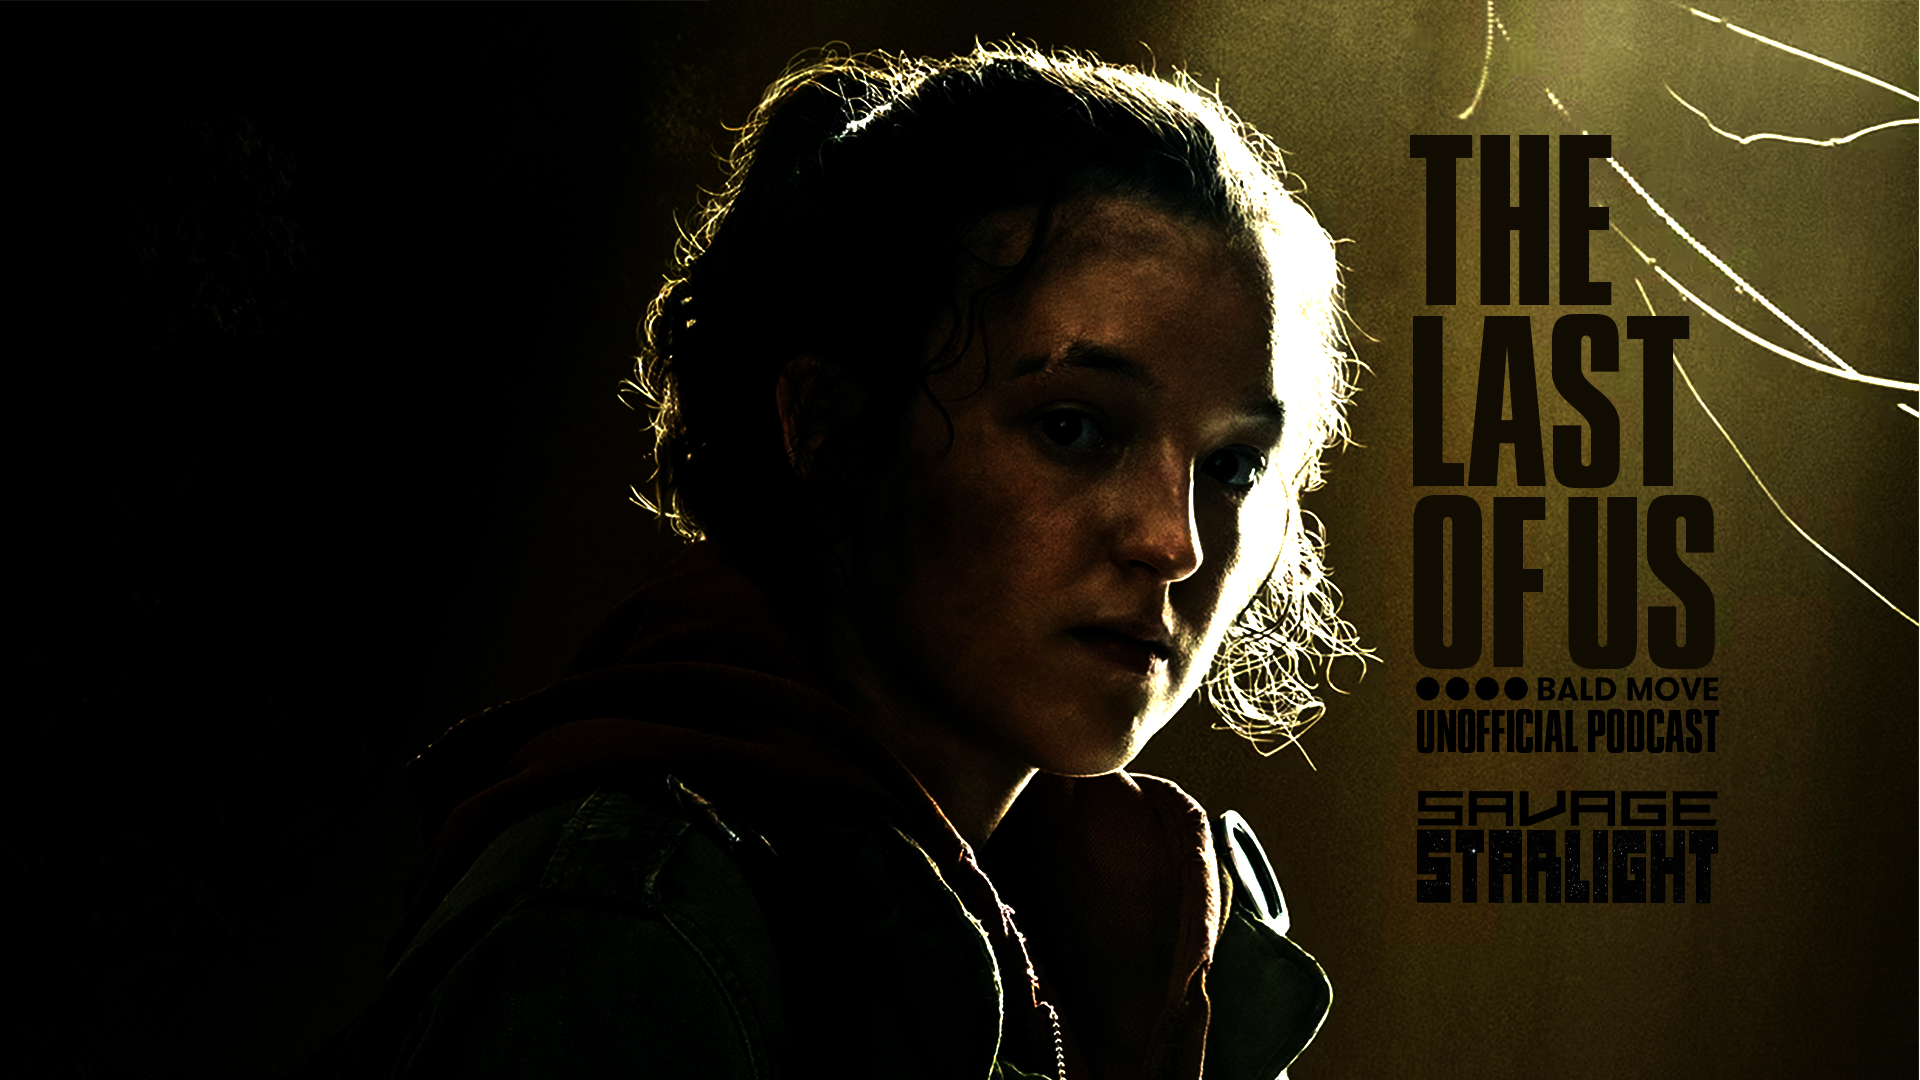 Watch The Last of Us Season 1 Episode 1 - When You're Lost in the Darkness  Online Now